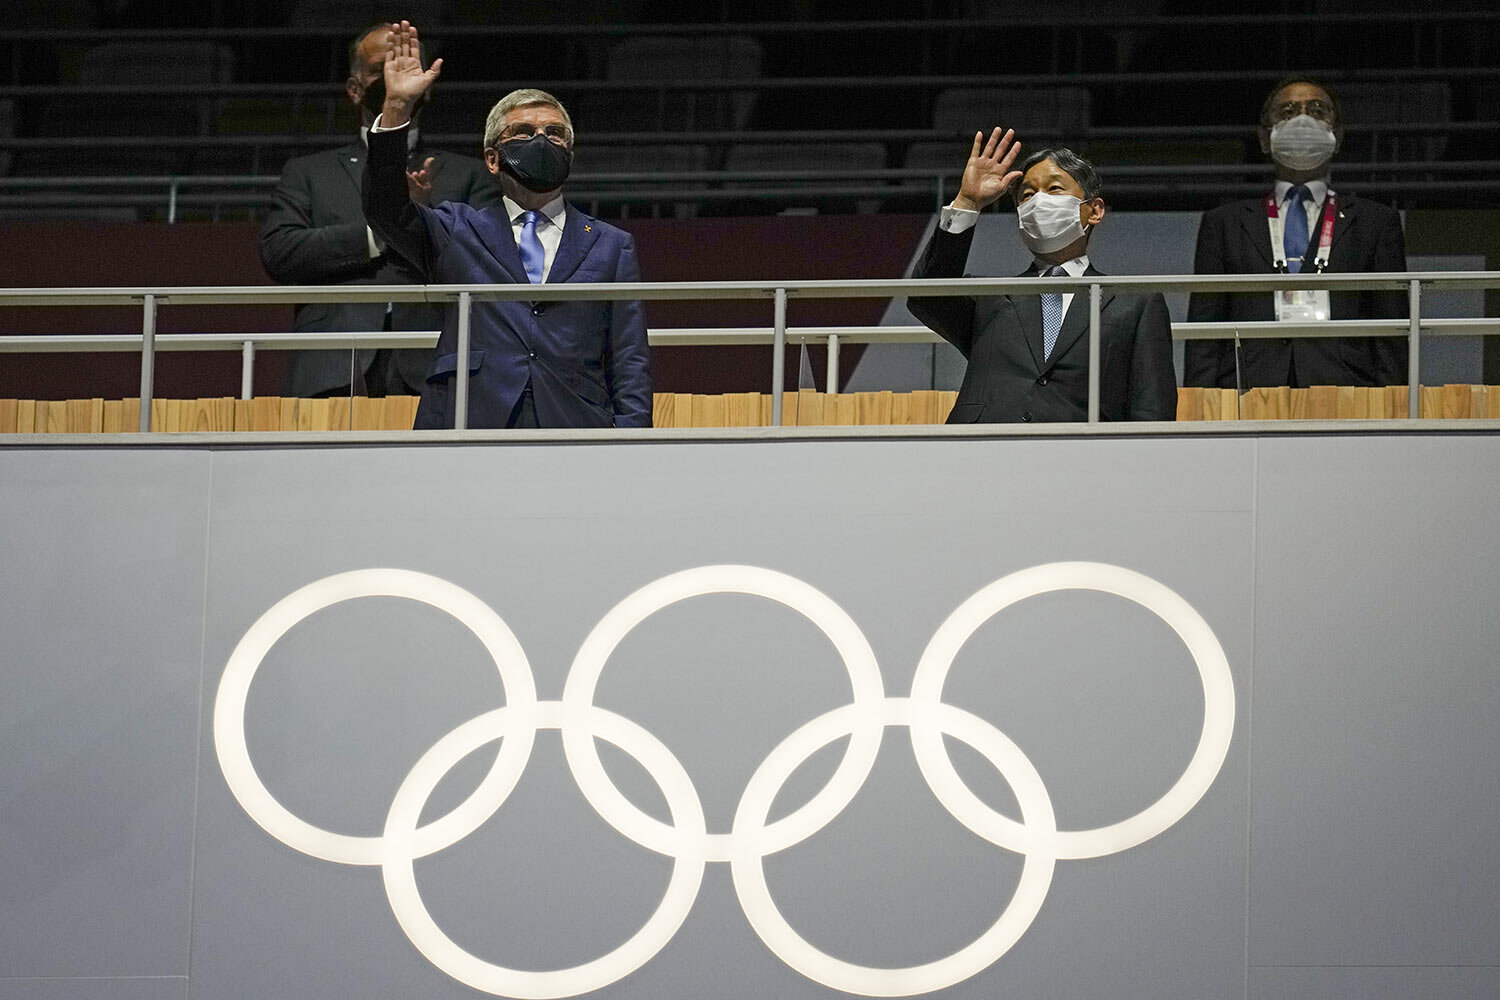  President of the IOC Thomas Bach, left, and Japan's Emperor Naruhito wave during the opening ceremony in the Olympic Stadium at the 2020 Summer Olympics, Friday, July 23, 2021, in Tokyo, Japan. (AP Photo/Natacha Pisarenko) 